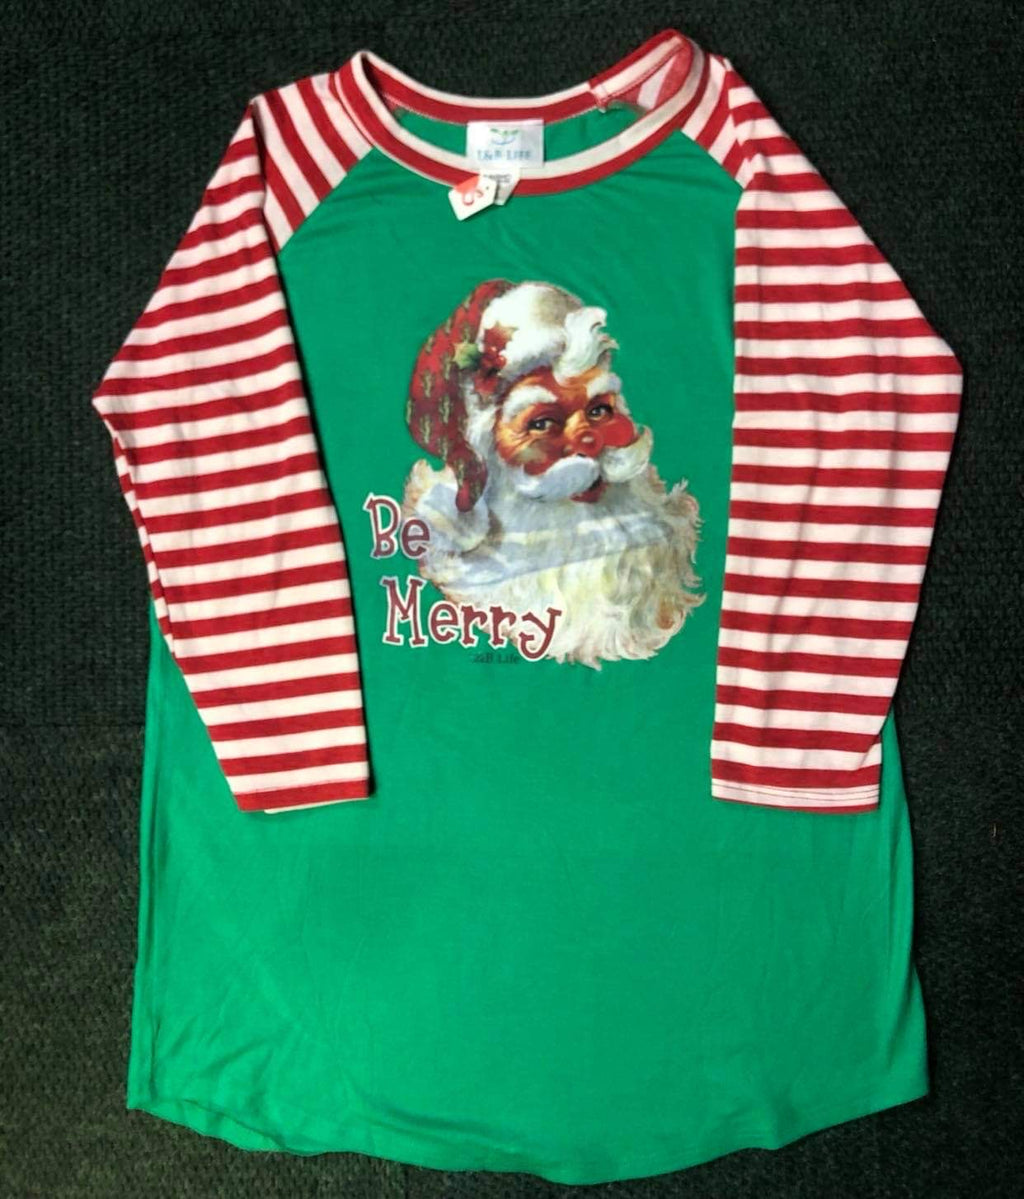 CHRISTMAS SANTA BE MERRY WITH CANDY CANE STRIPED SLEEVE CUSTOM RAGLAN SHIRT - Lil Monkey Boutique